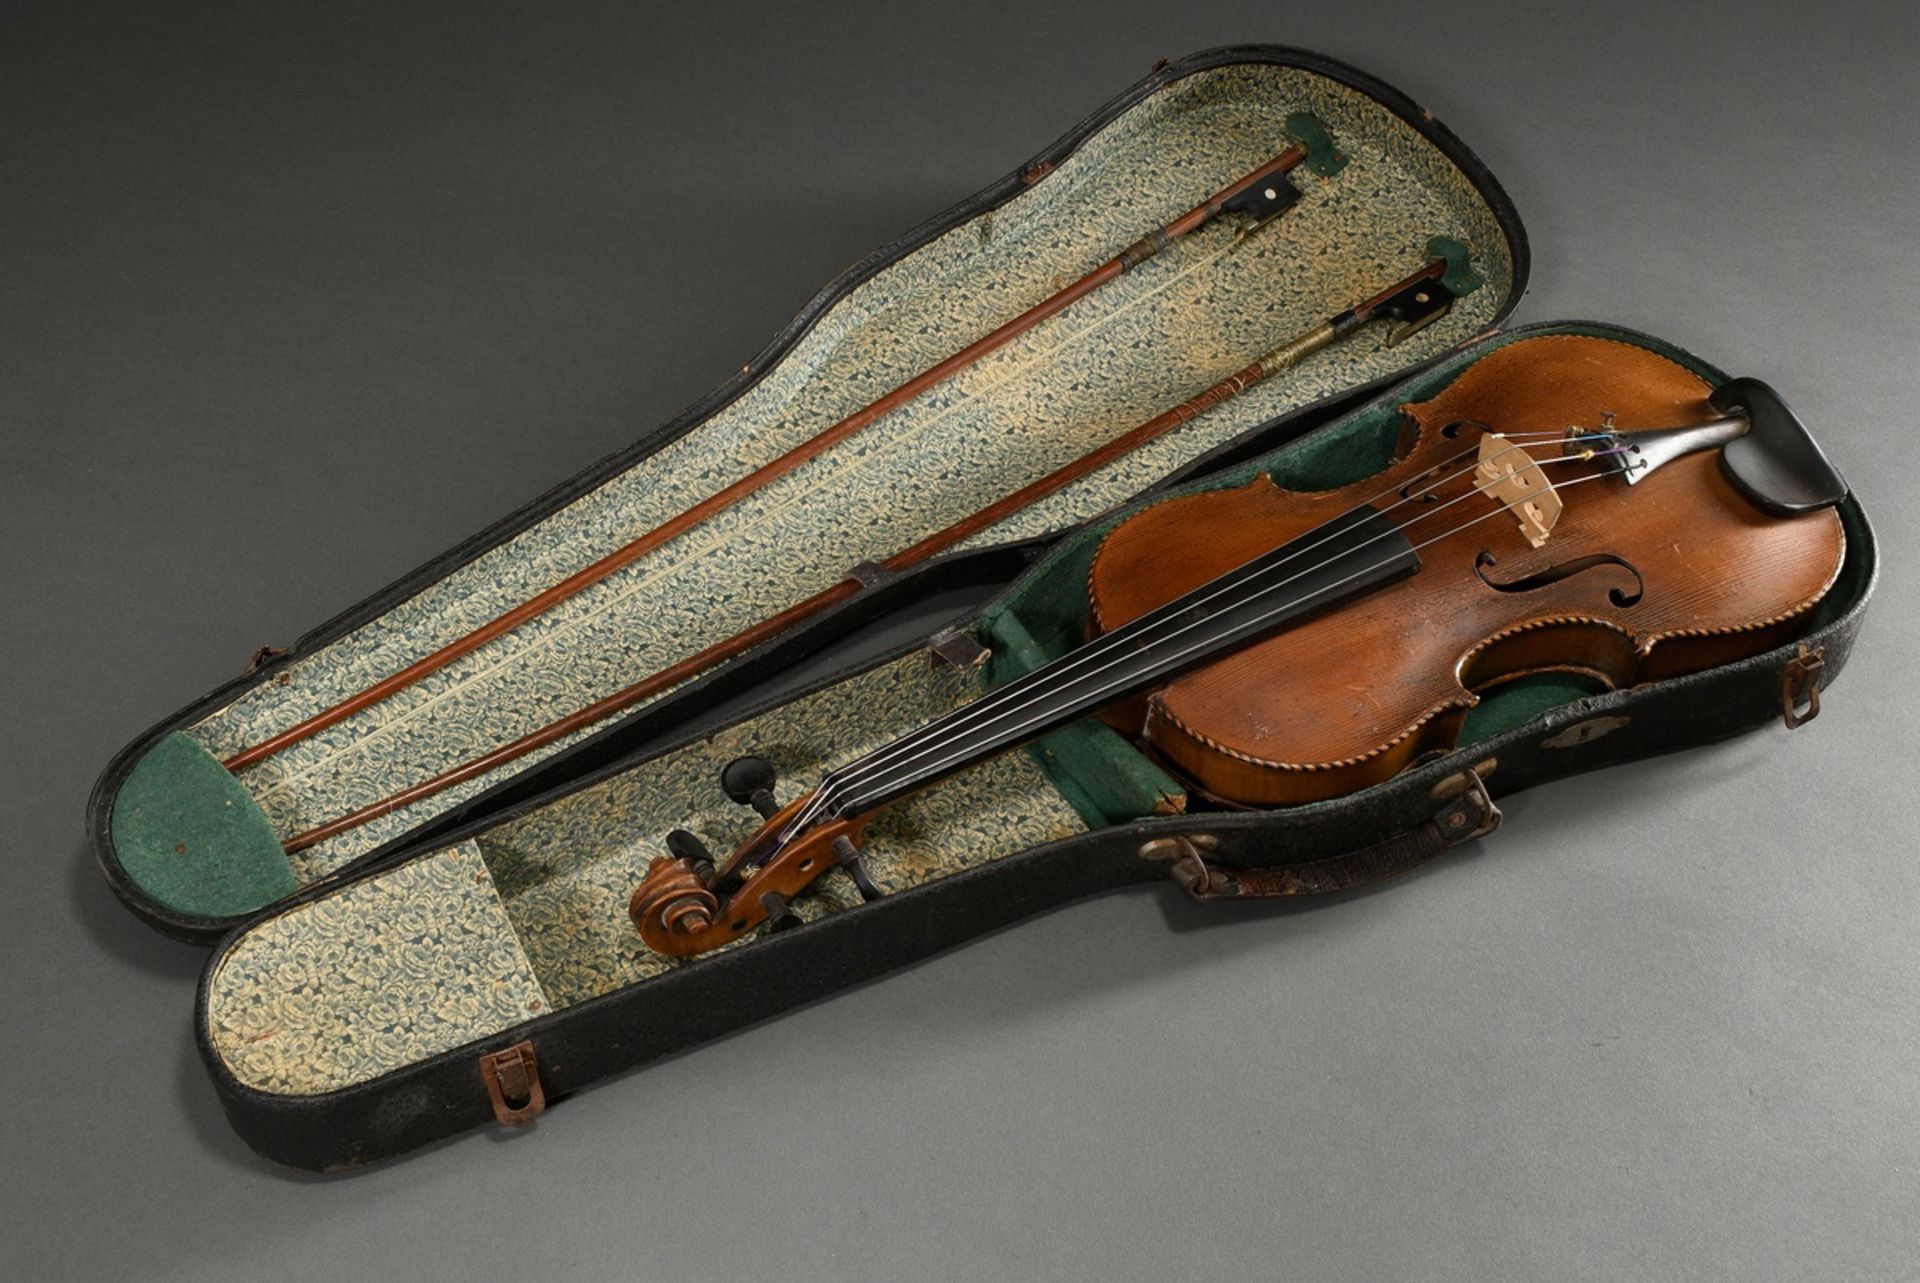 Historicizing violin, German, c. 1900, without label, one-piece back, surrounding checker band, hol - Image 8 of 11